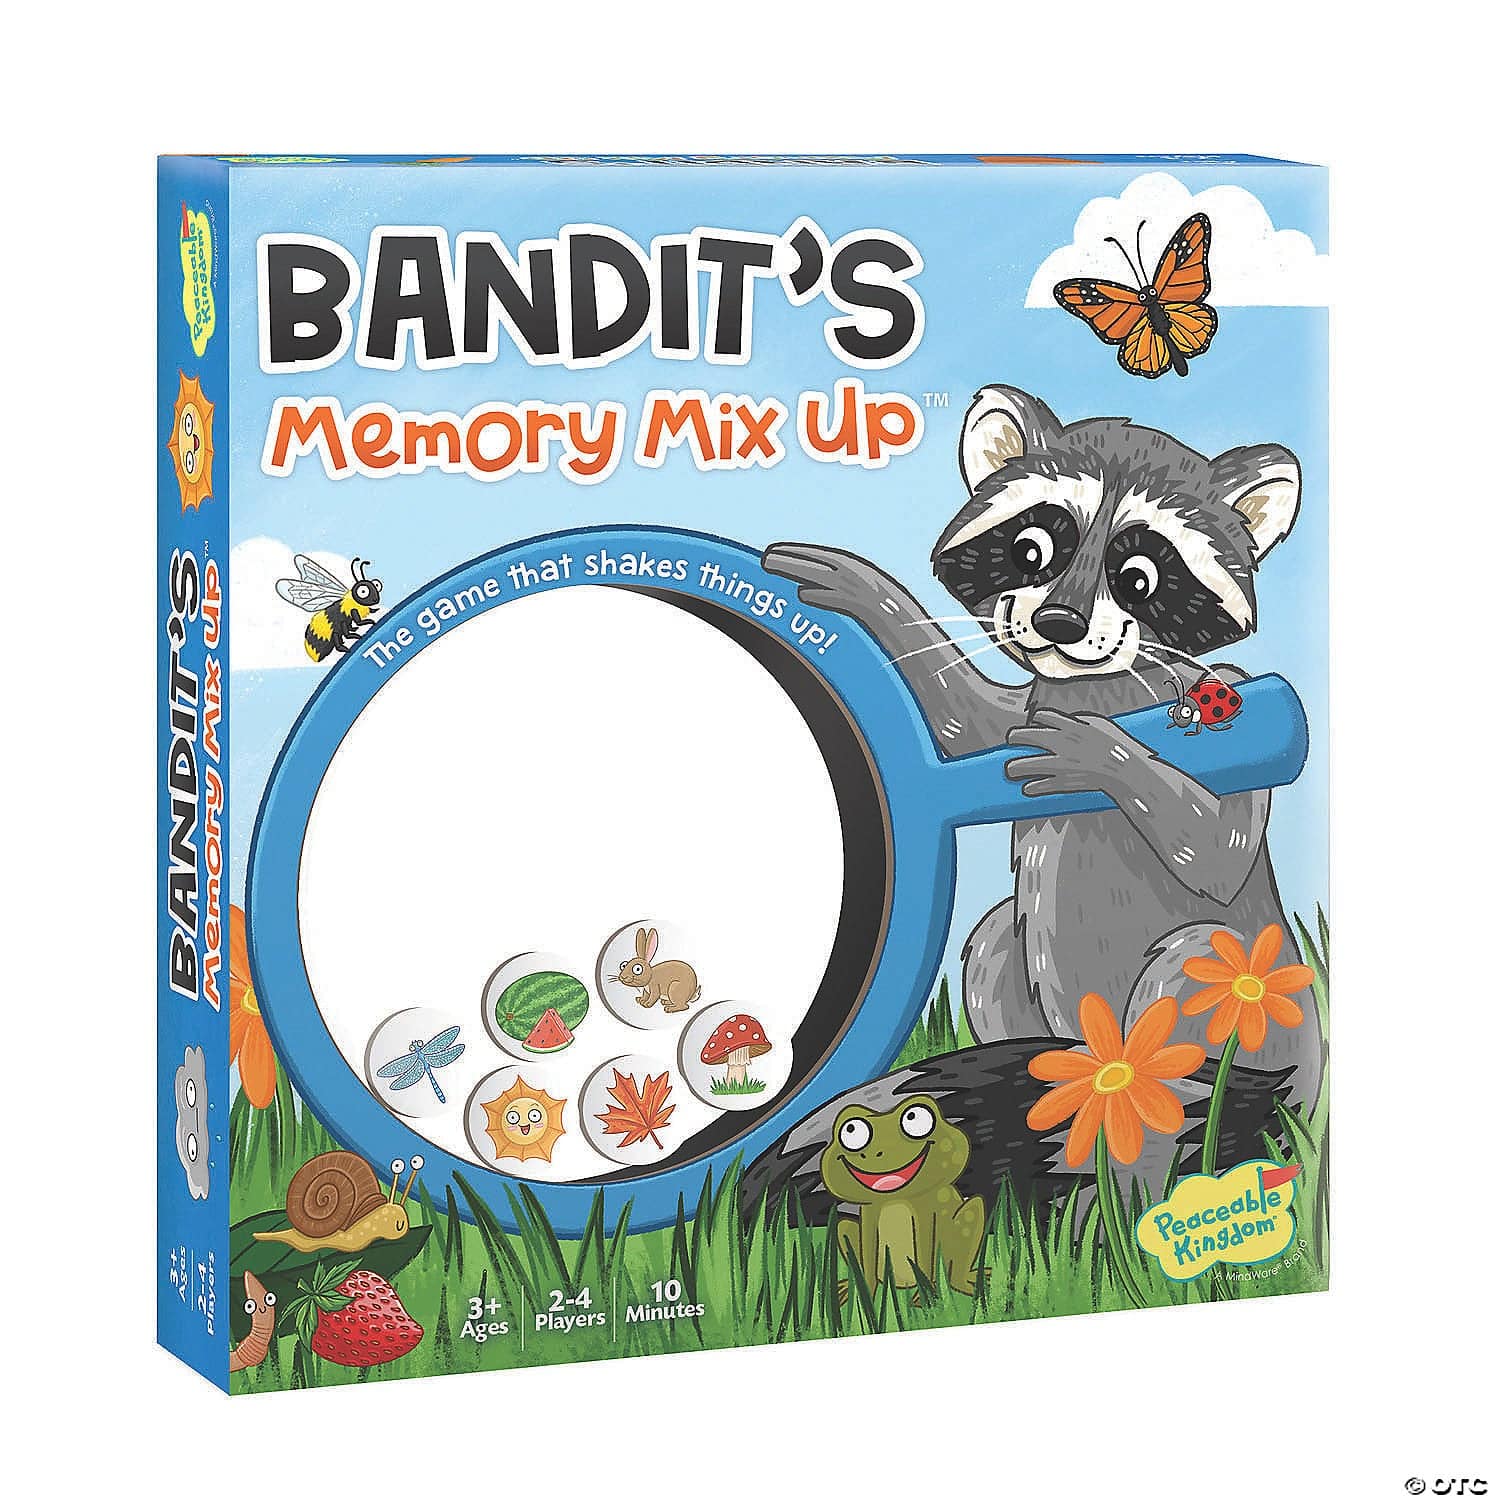 Bandit's Memory Mix Up - Twinkle Twinkle Little One